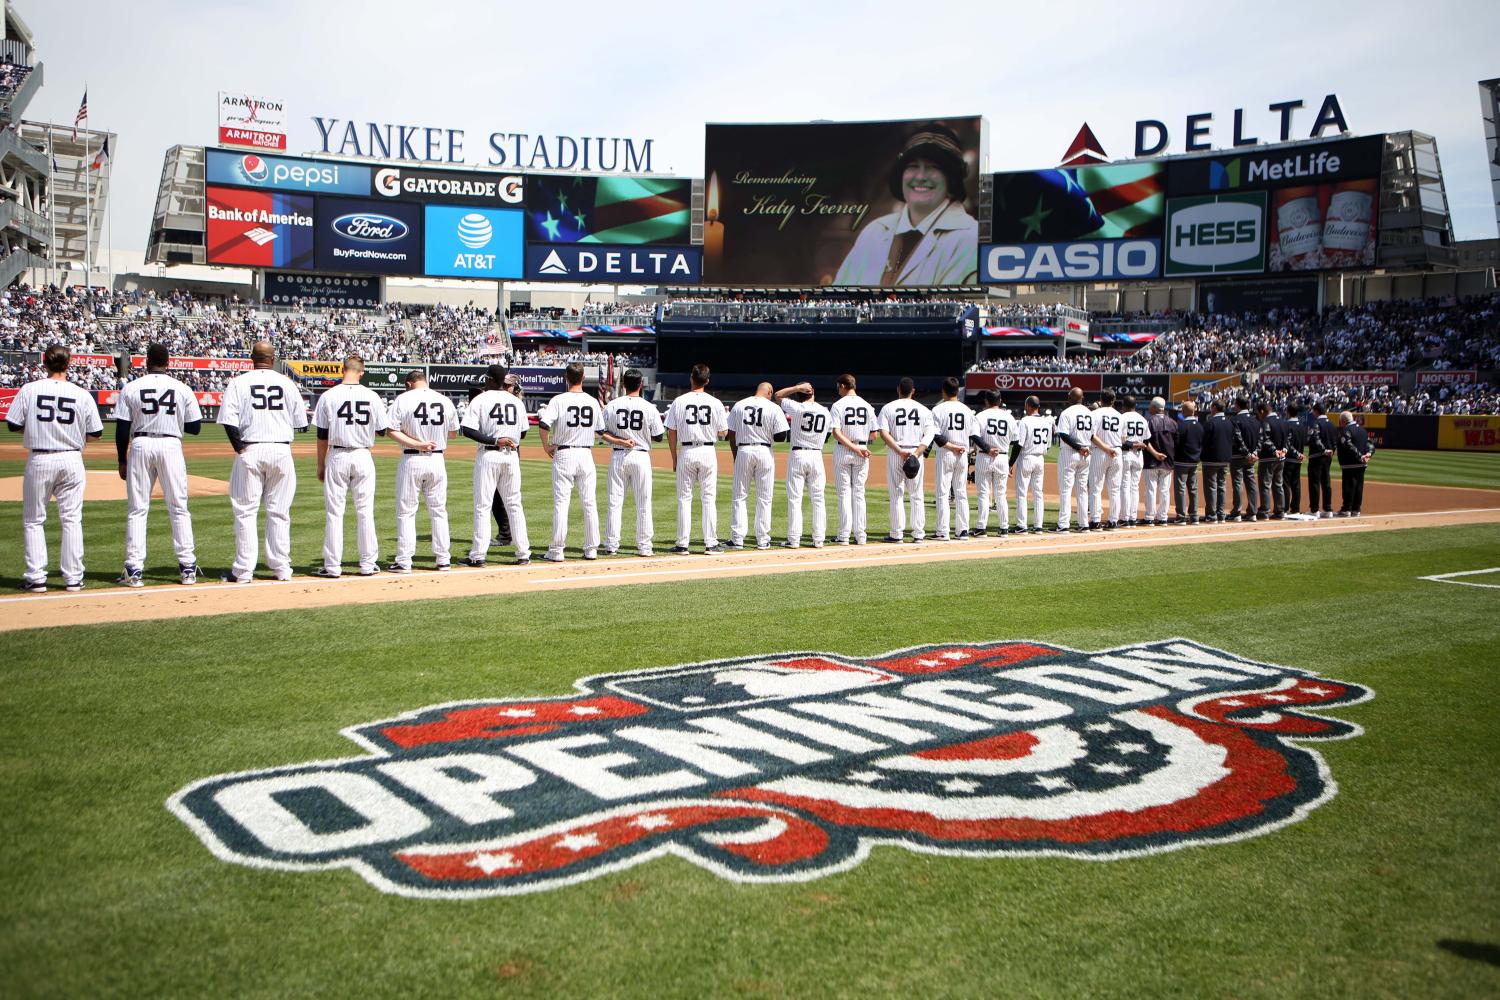 Tampa Bay Rays at New York Yankees for opening day of the 2018 MLB season.